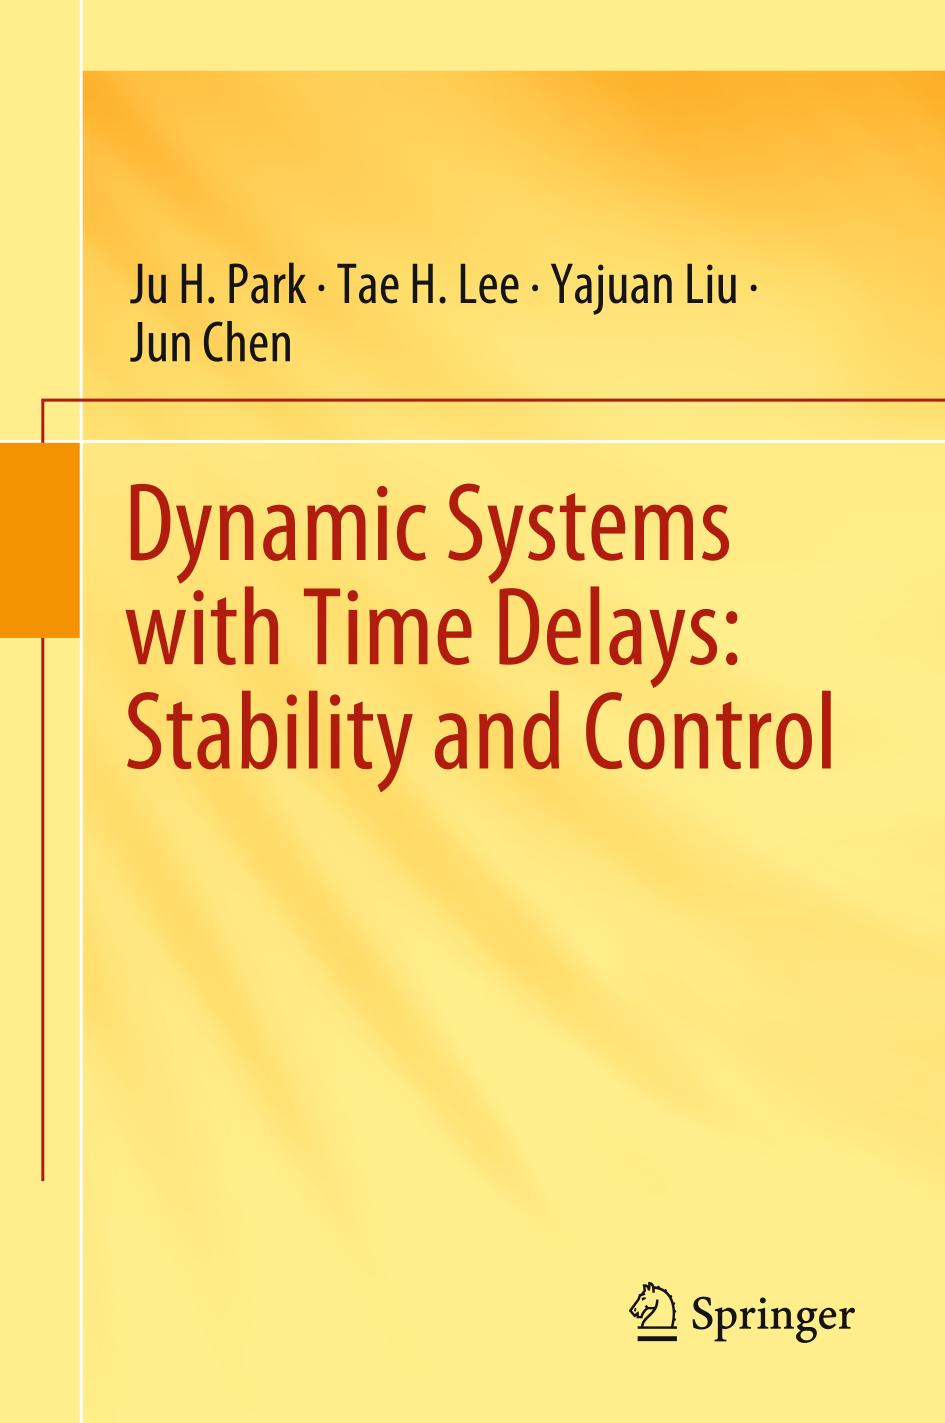 Dynamic Systems with Time Delays